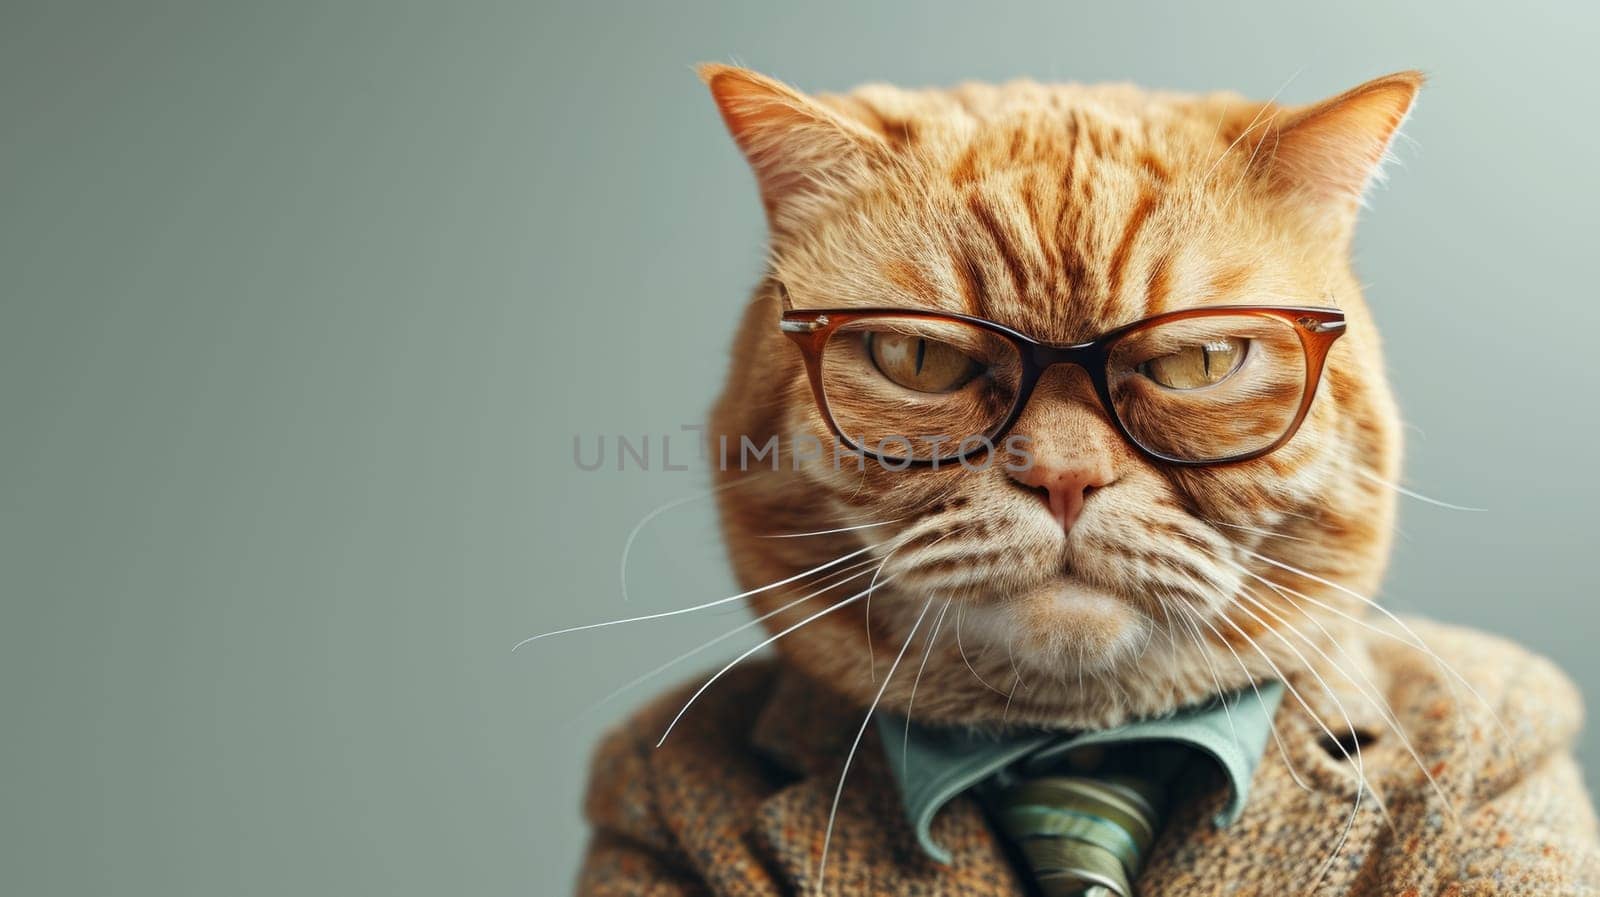 A cat wearing glasses and a suit with tie, AI by starush